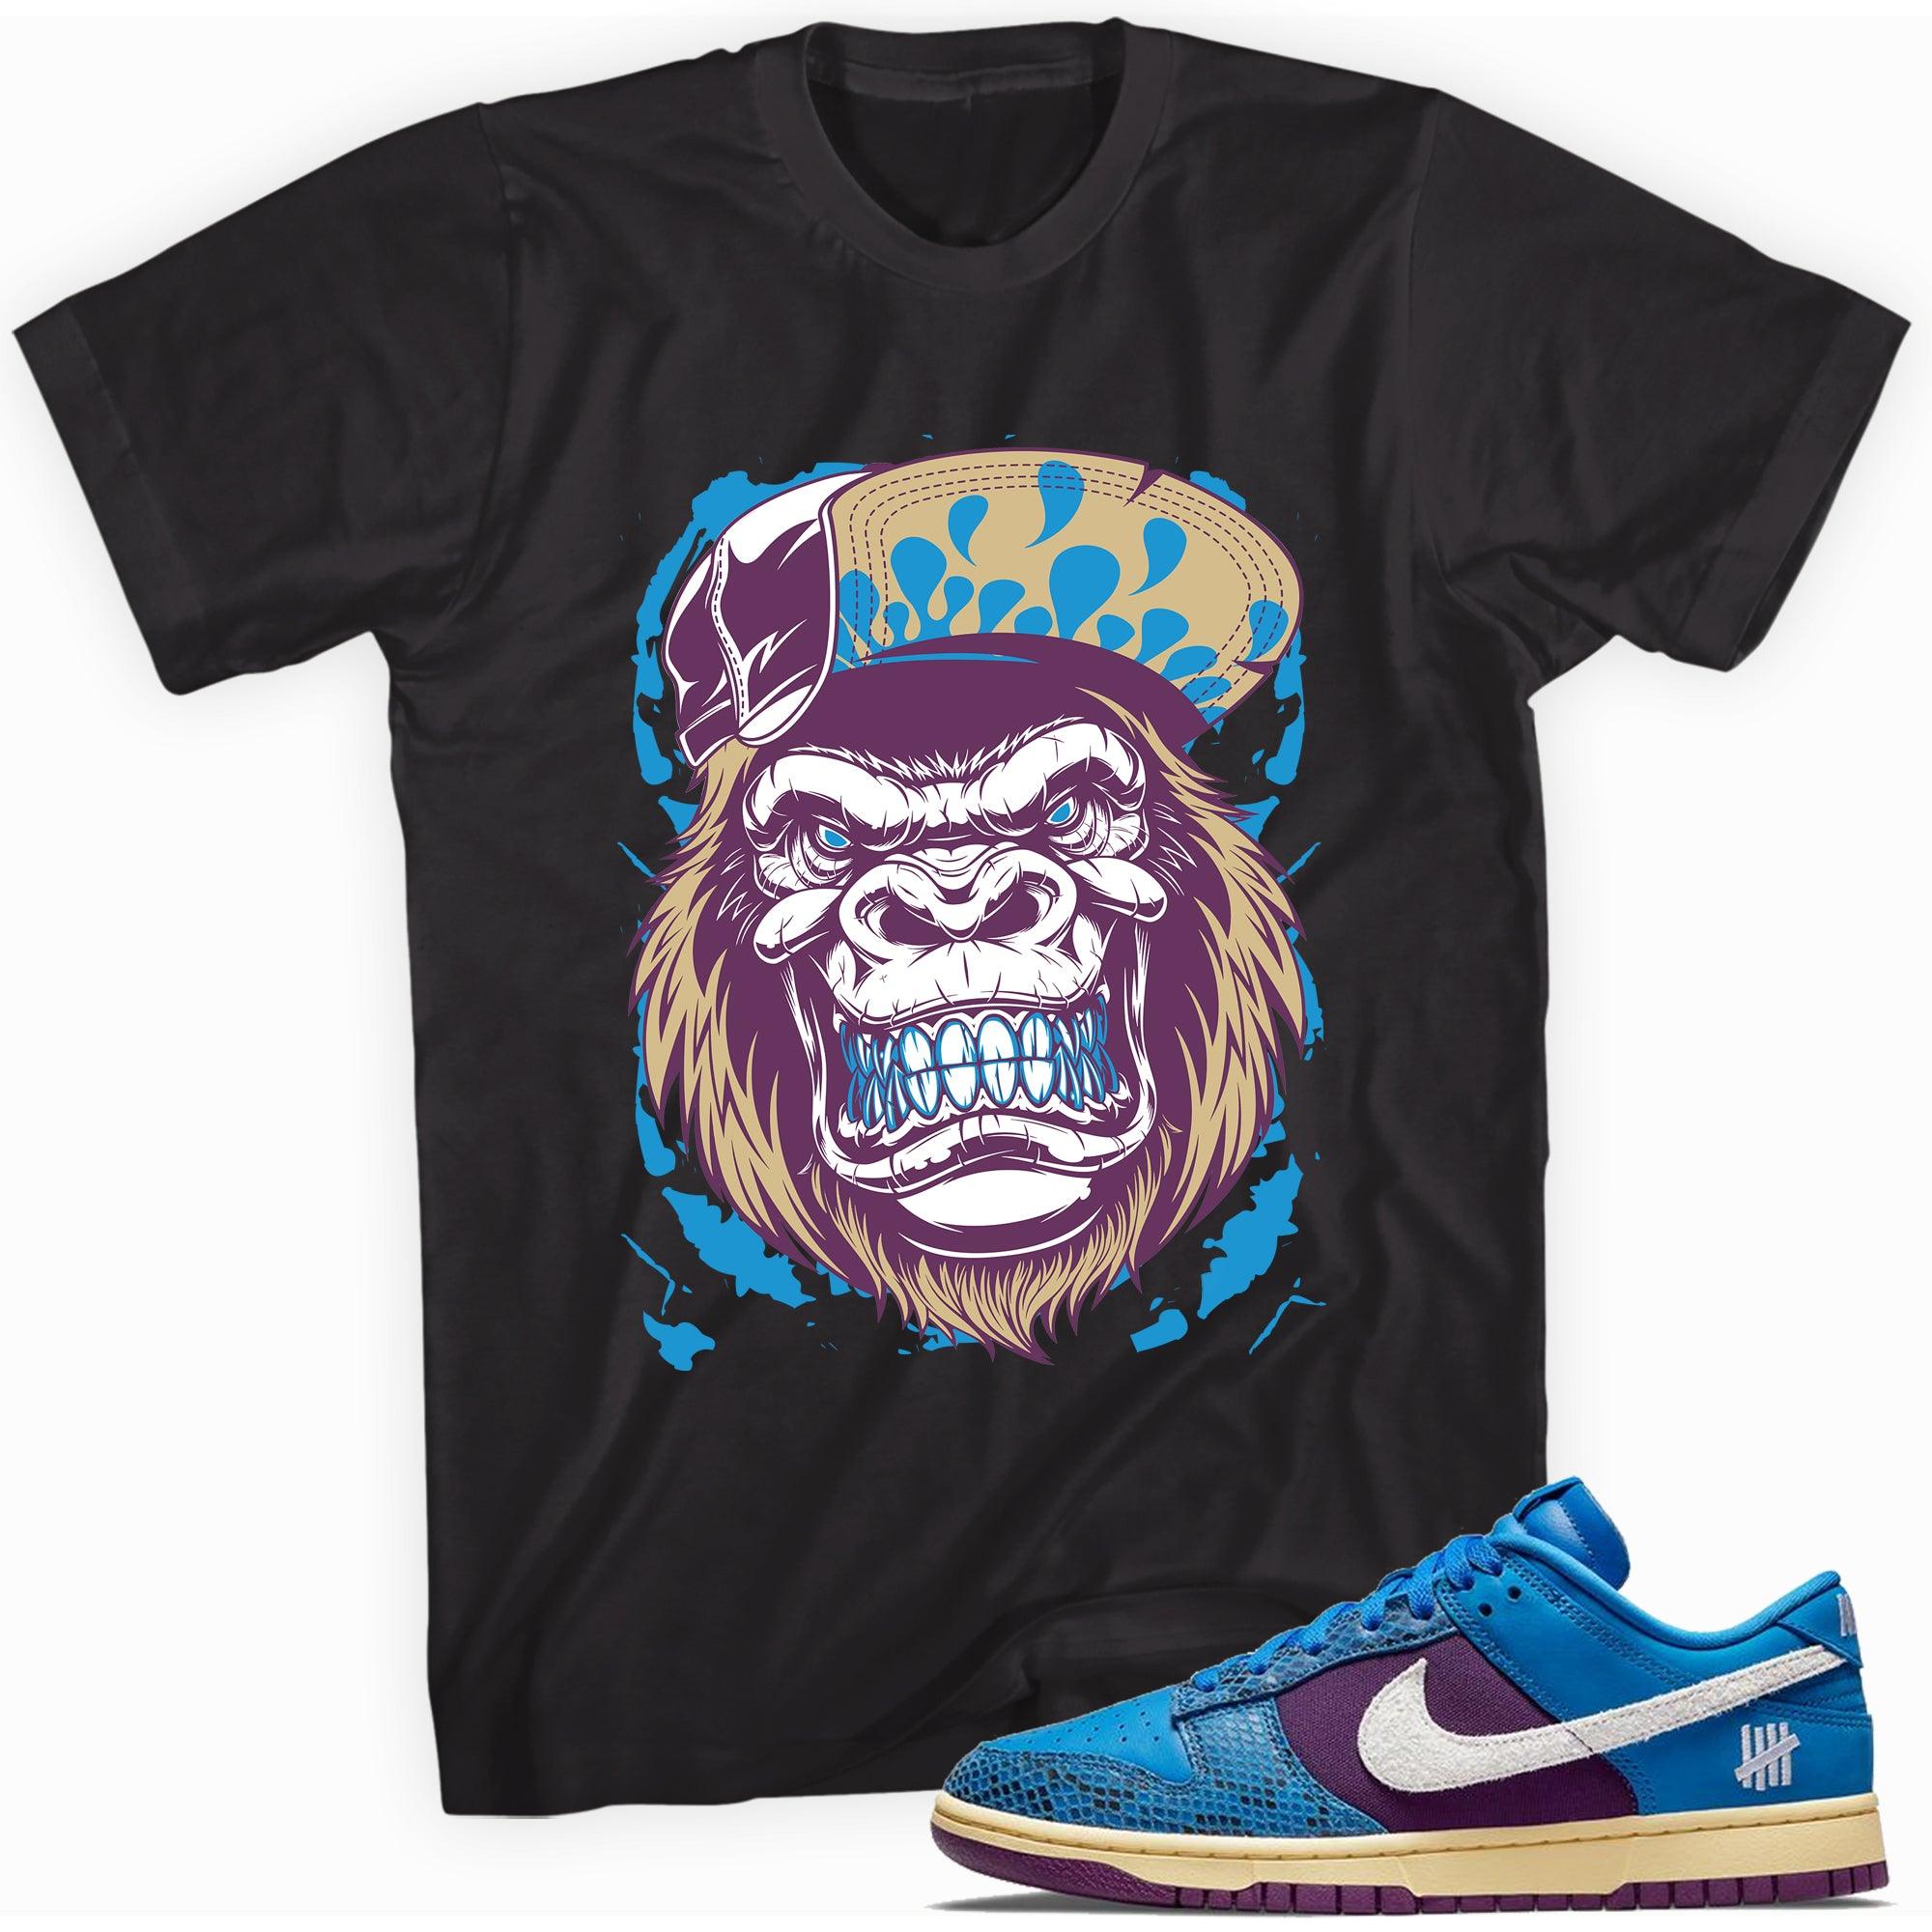 Black Gorilla Beast Shirt Nike Dunk Low Undefeated 5 On It Dunk vs AF1 photo